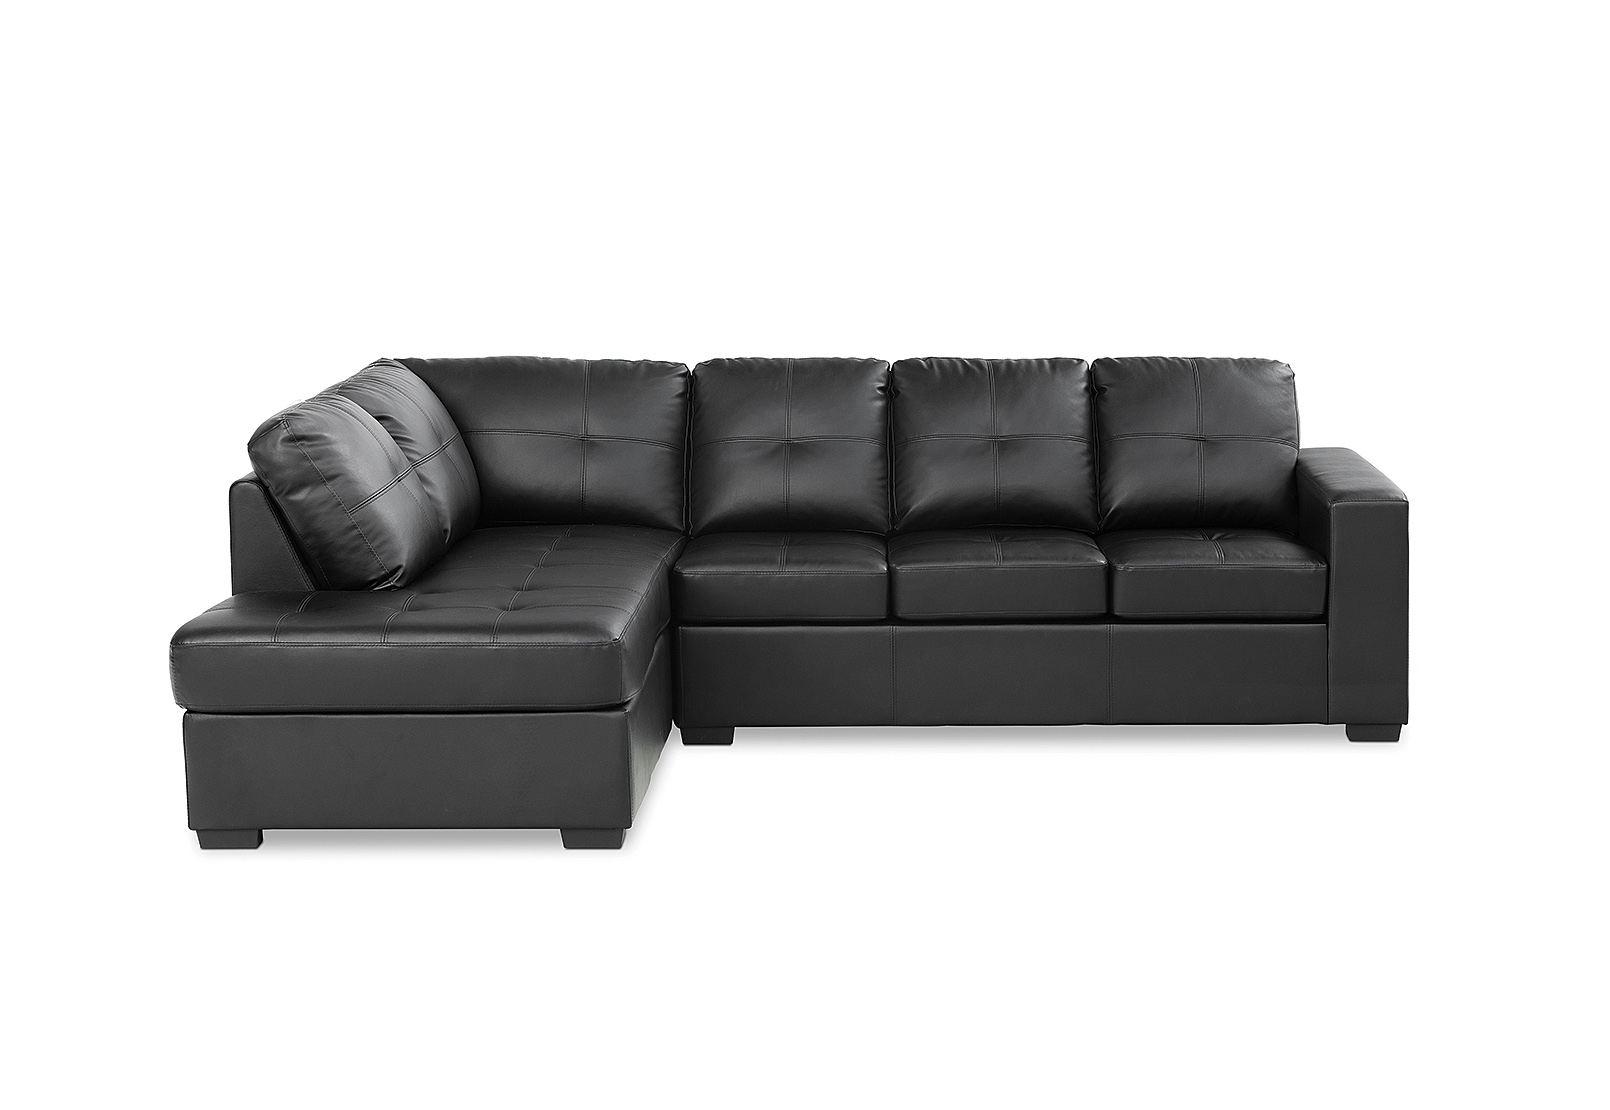 BLACK DIAMOND Leather-Look Left-Hand Facing Corner Chaise with Sofa Bed